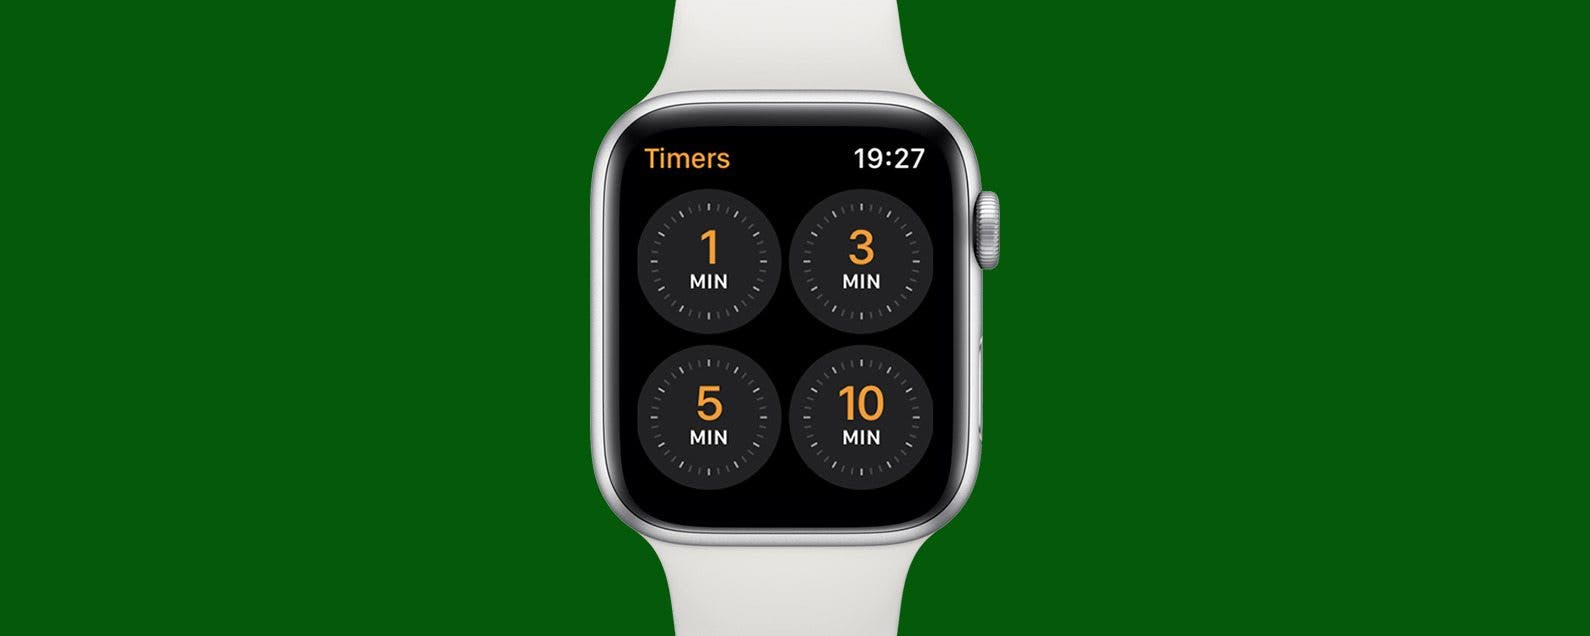 How to Set Timer on Apple Watch